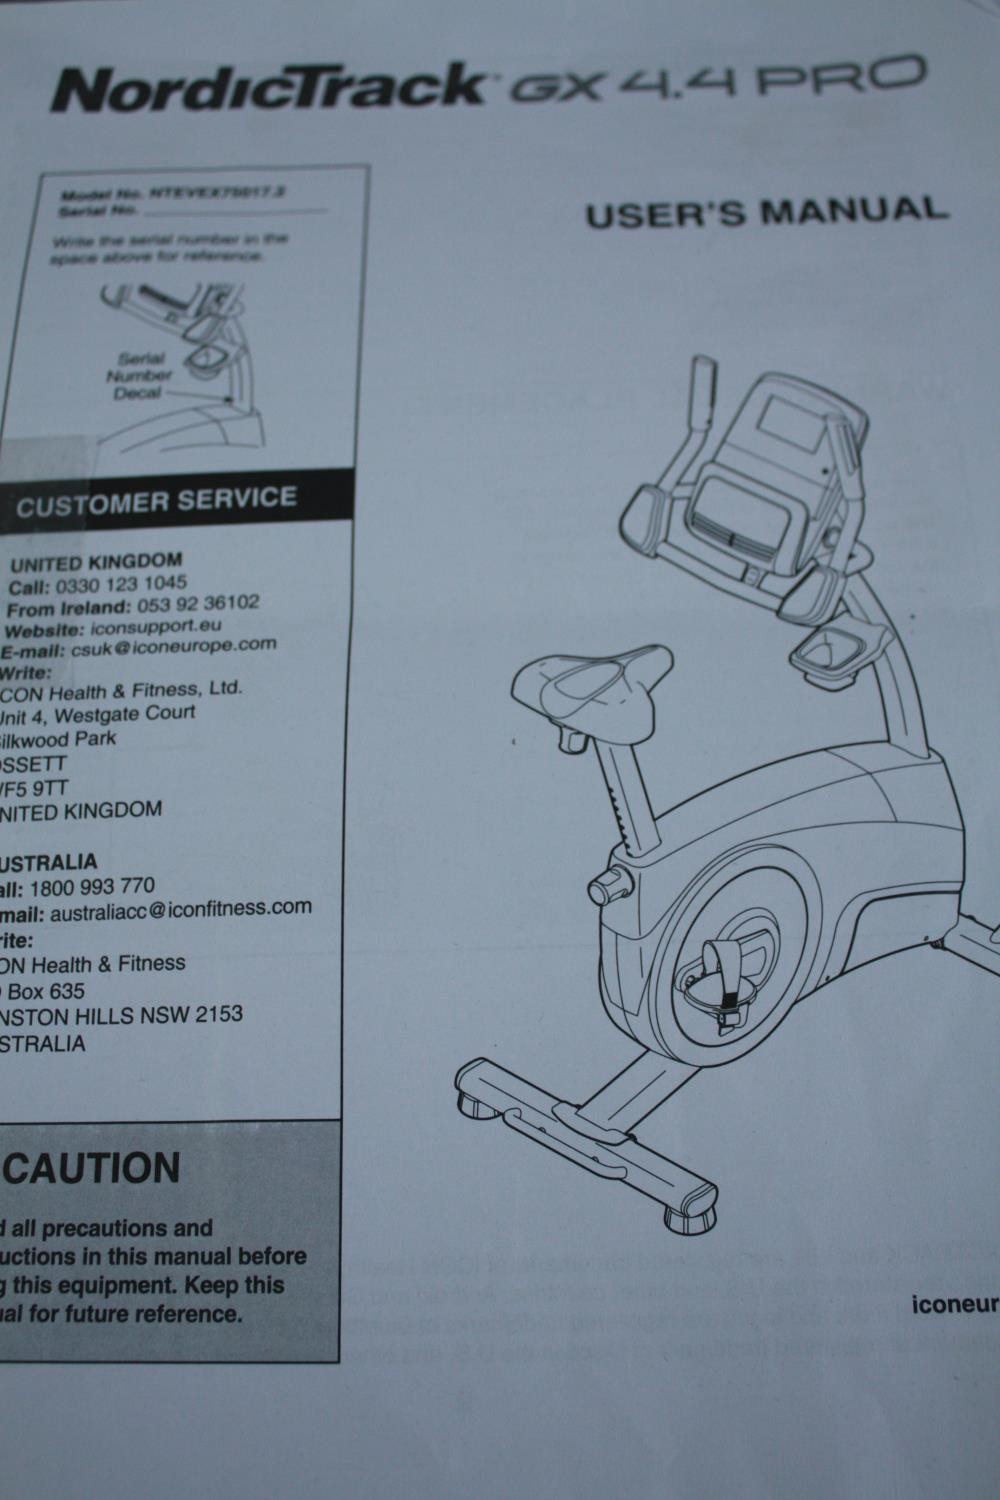 A contemporary NordicTrack exercise bike. H.160 W.110 D.31cm. - Image 7 of 7